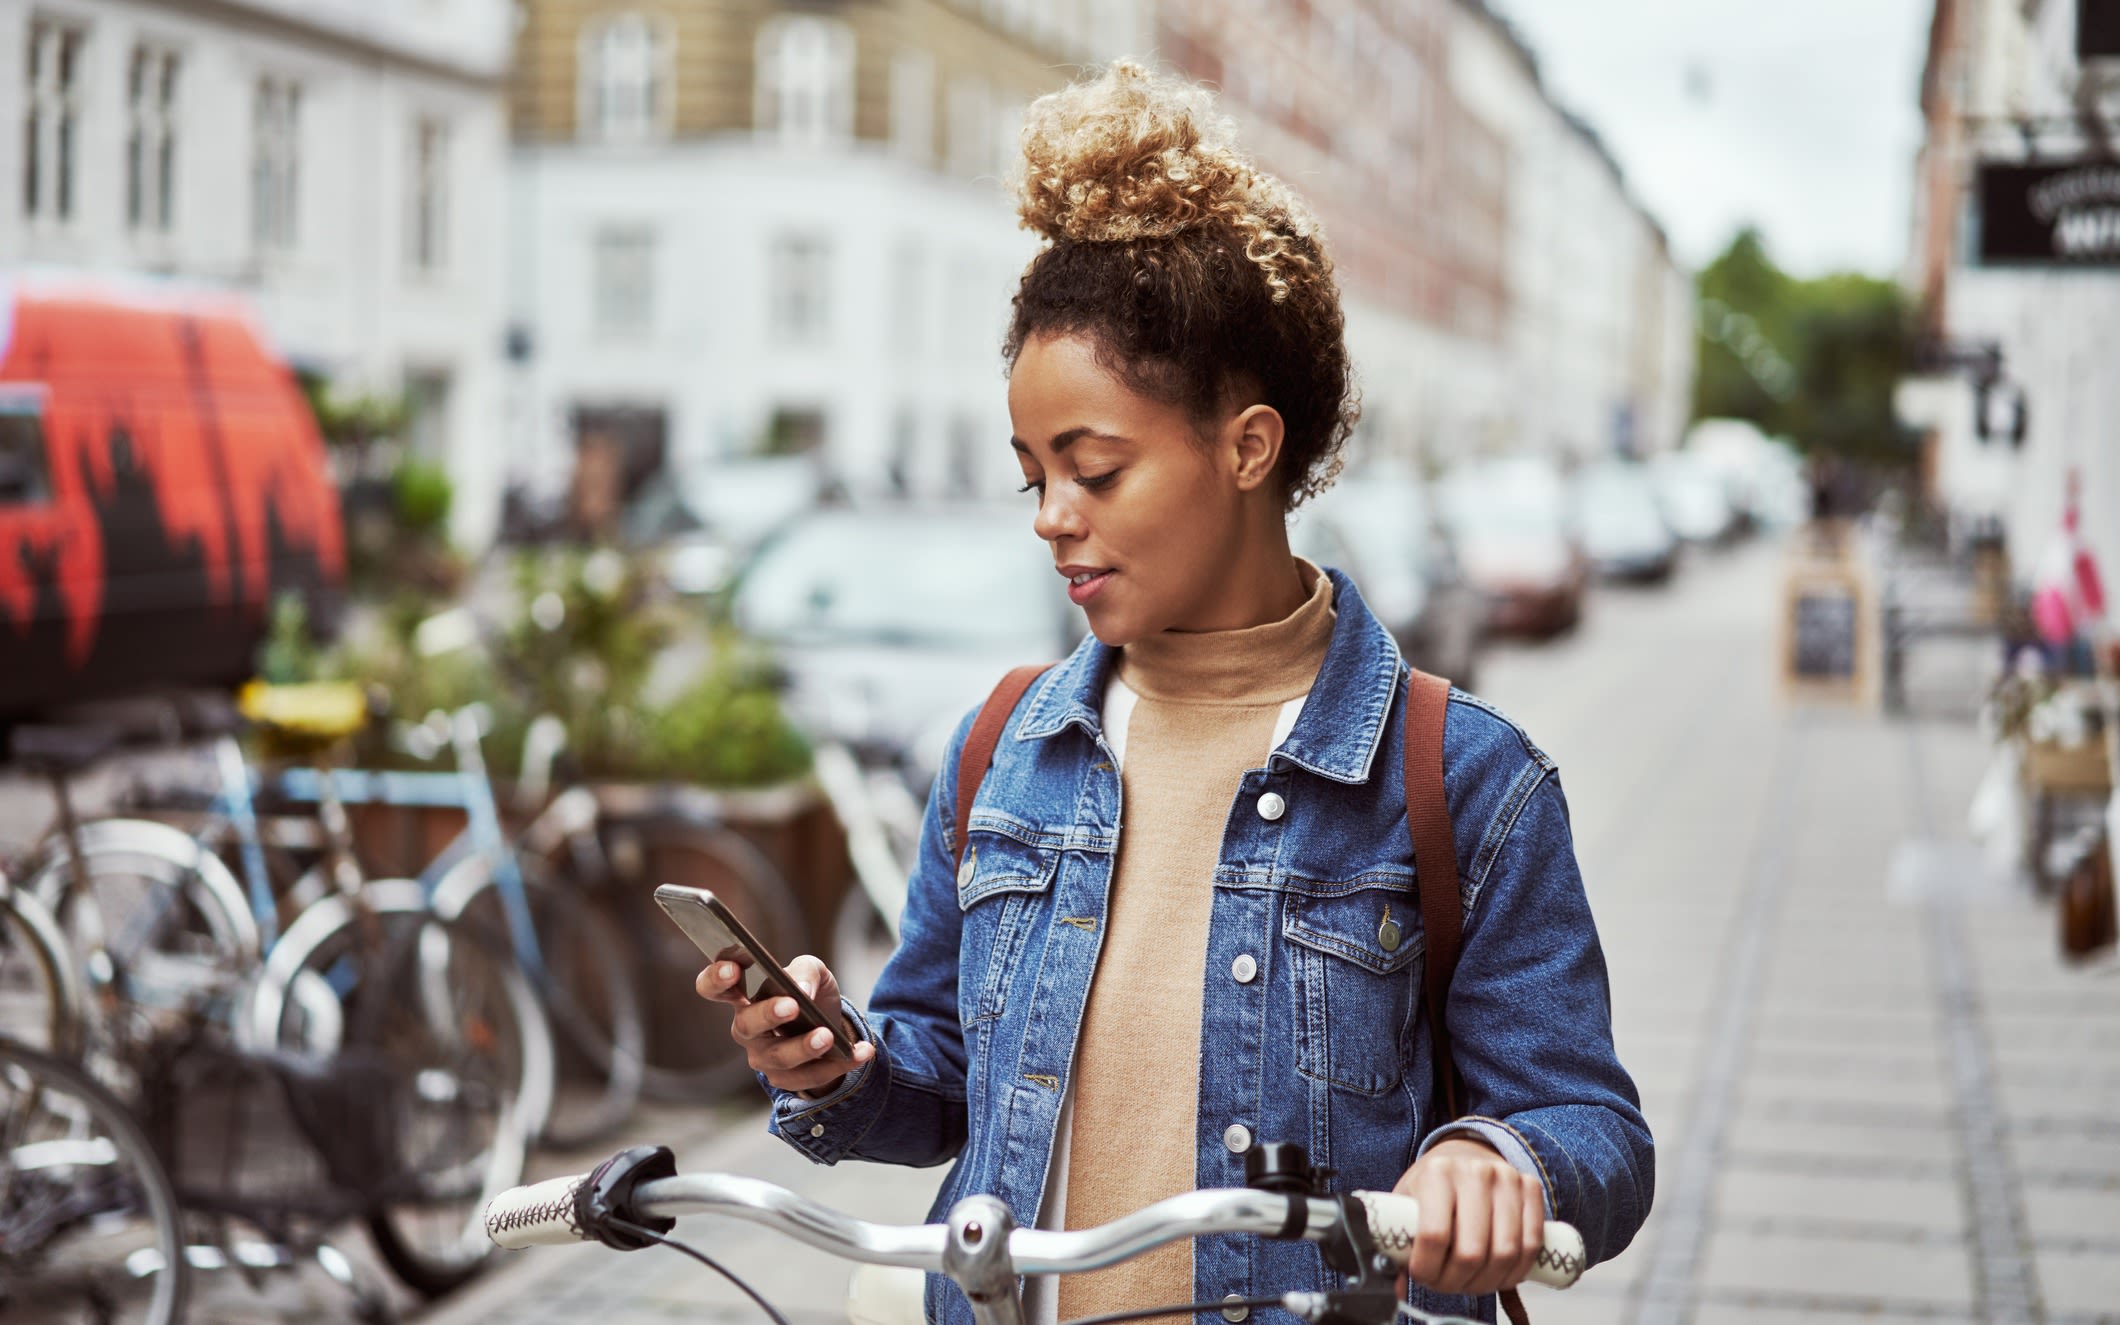 A woman standing with a bike, using a phone